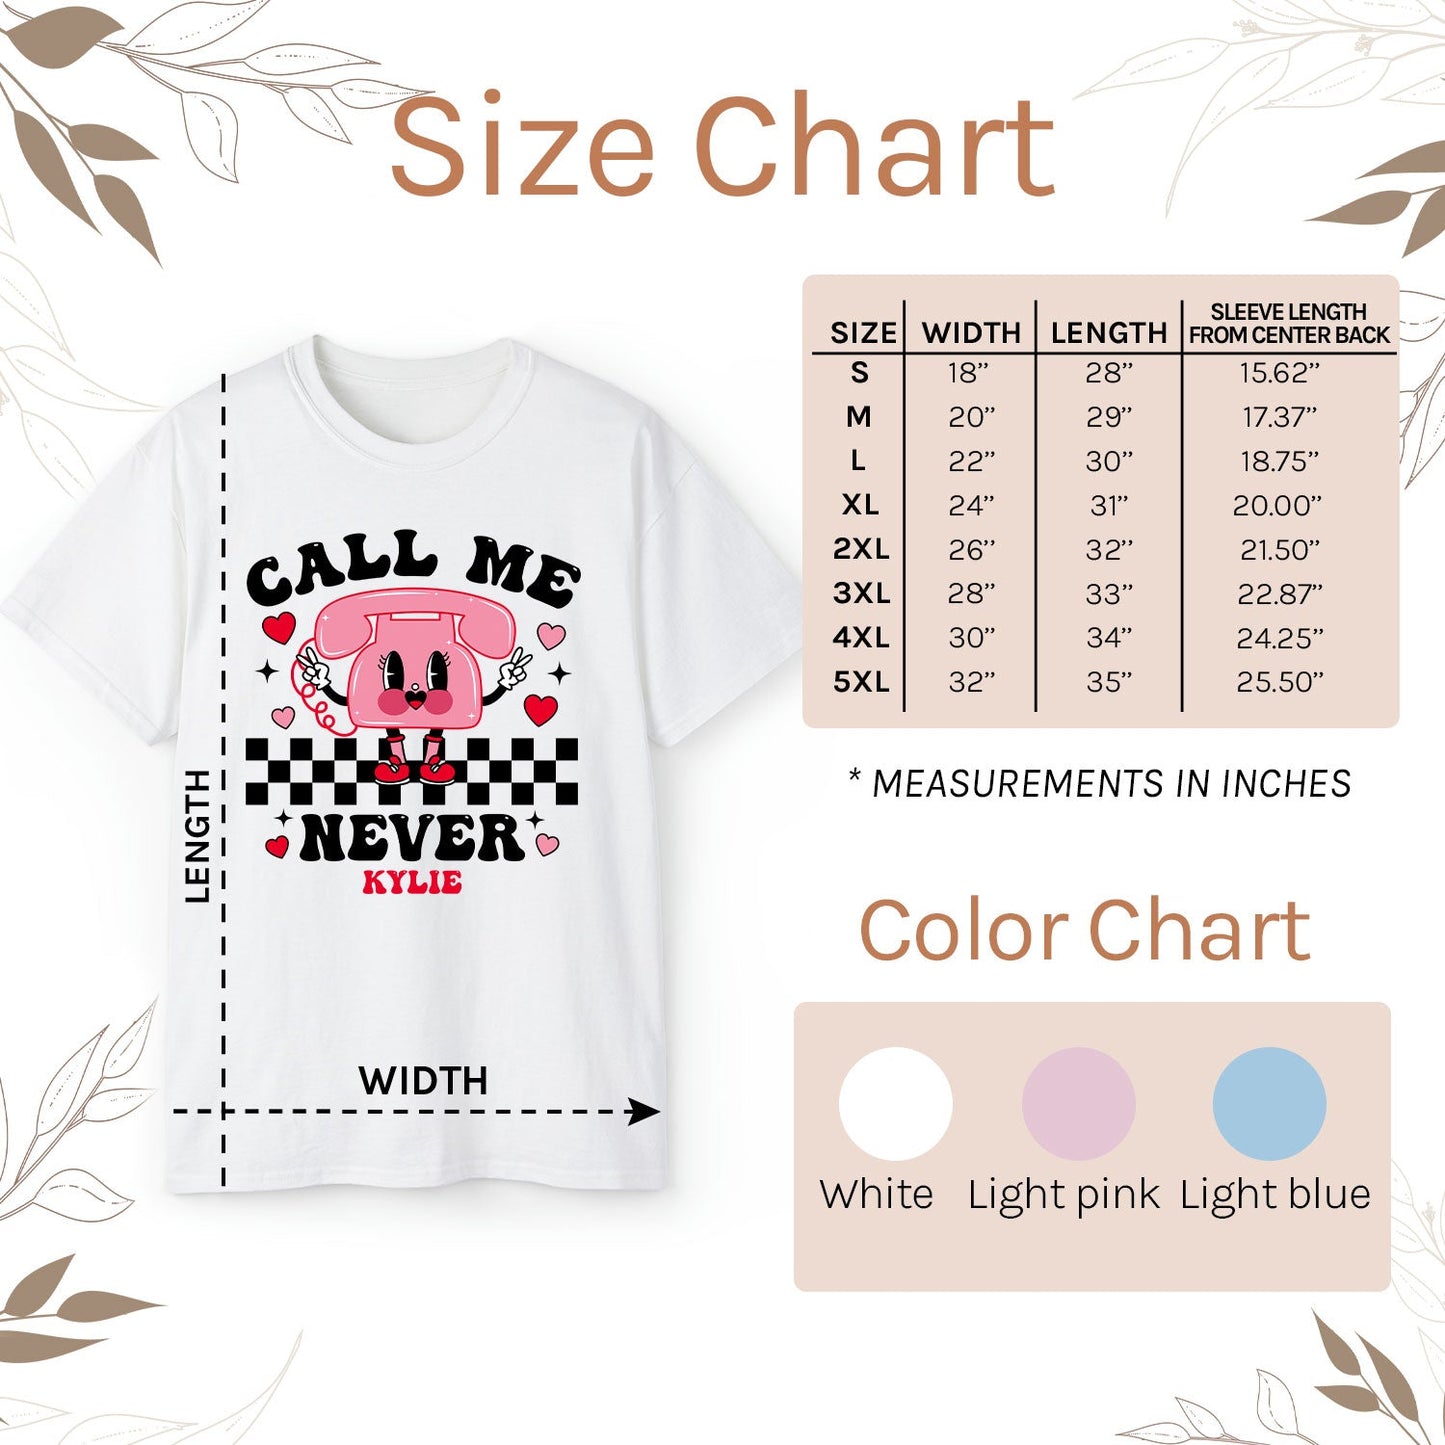 Call Me Never - Personalized Anti-Valentine's Day gift For Friends - Custom Tshirt - MyMindfulGifts